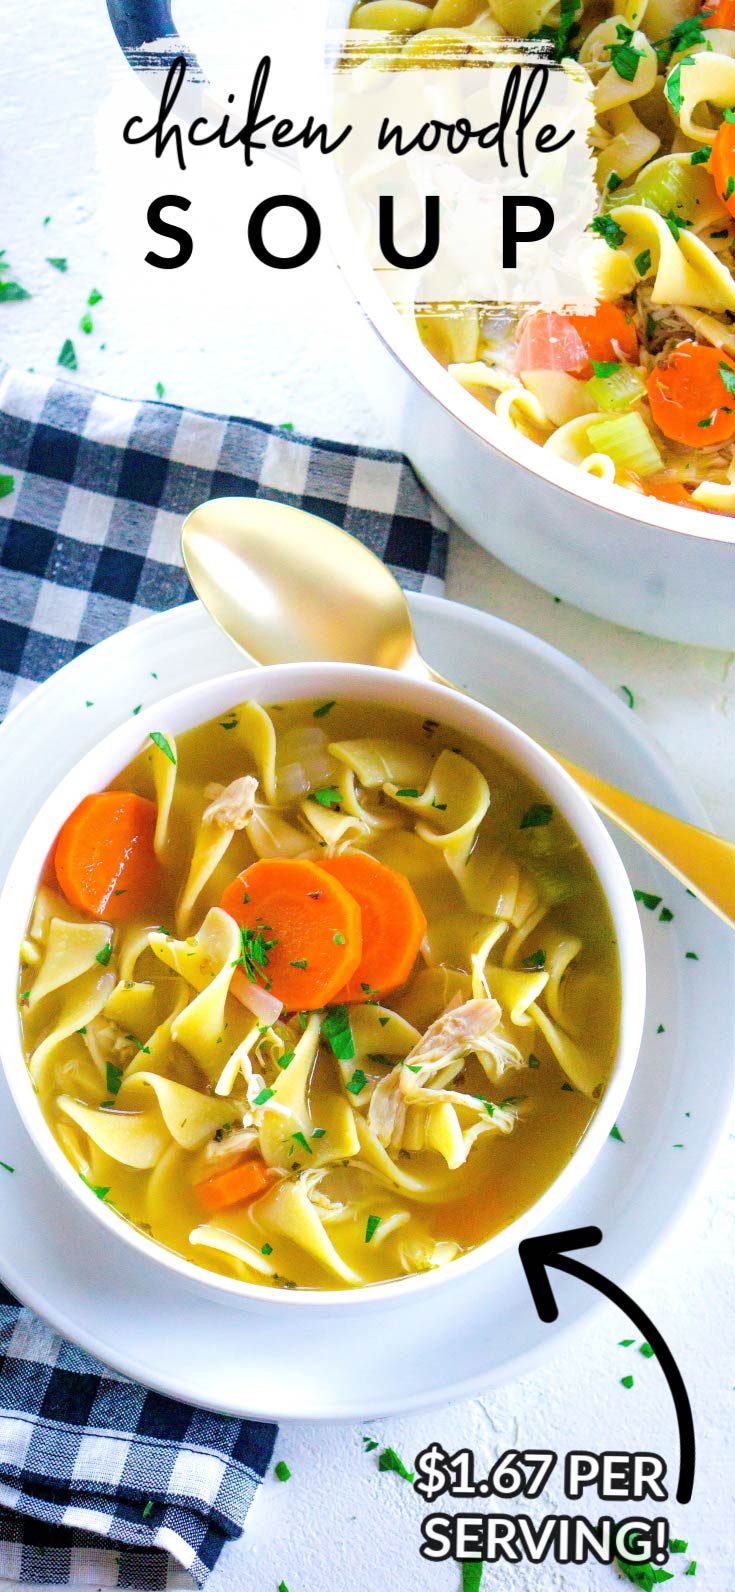 Make this quick and easy Rotisserie Chicken Noodle Soup recipe in just 30 minutes. It’s the comfort food recipe your family craves for easy weeknight dinners. It serves 6 and costs just $10.02 to make. That's just $1.67 per serving.  via @foodfolksandfun